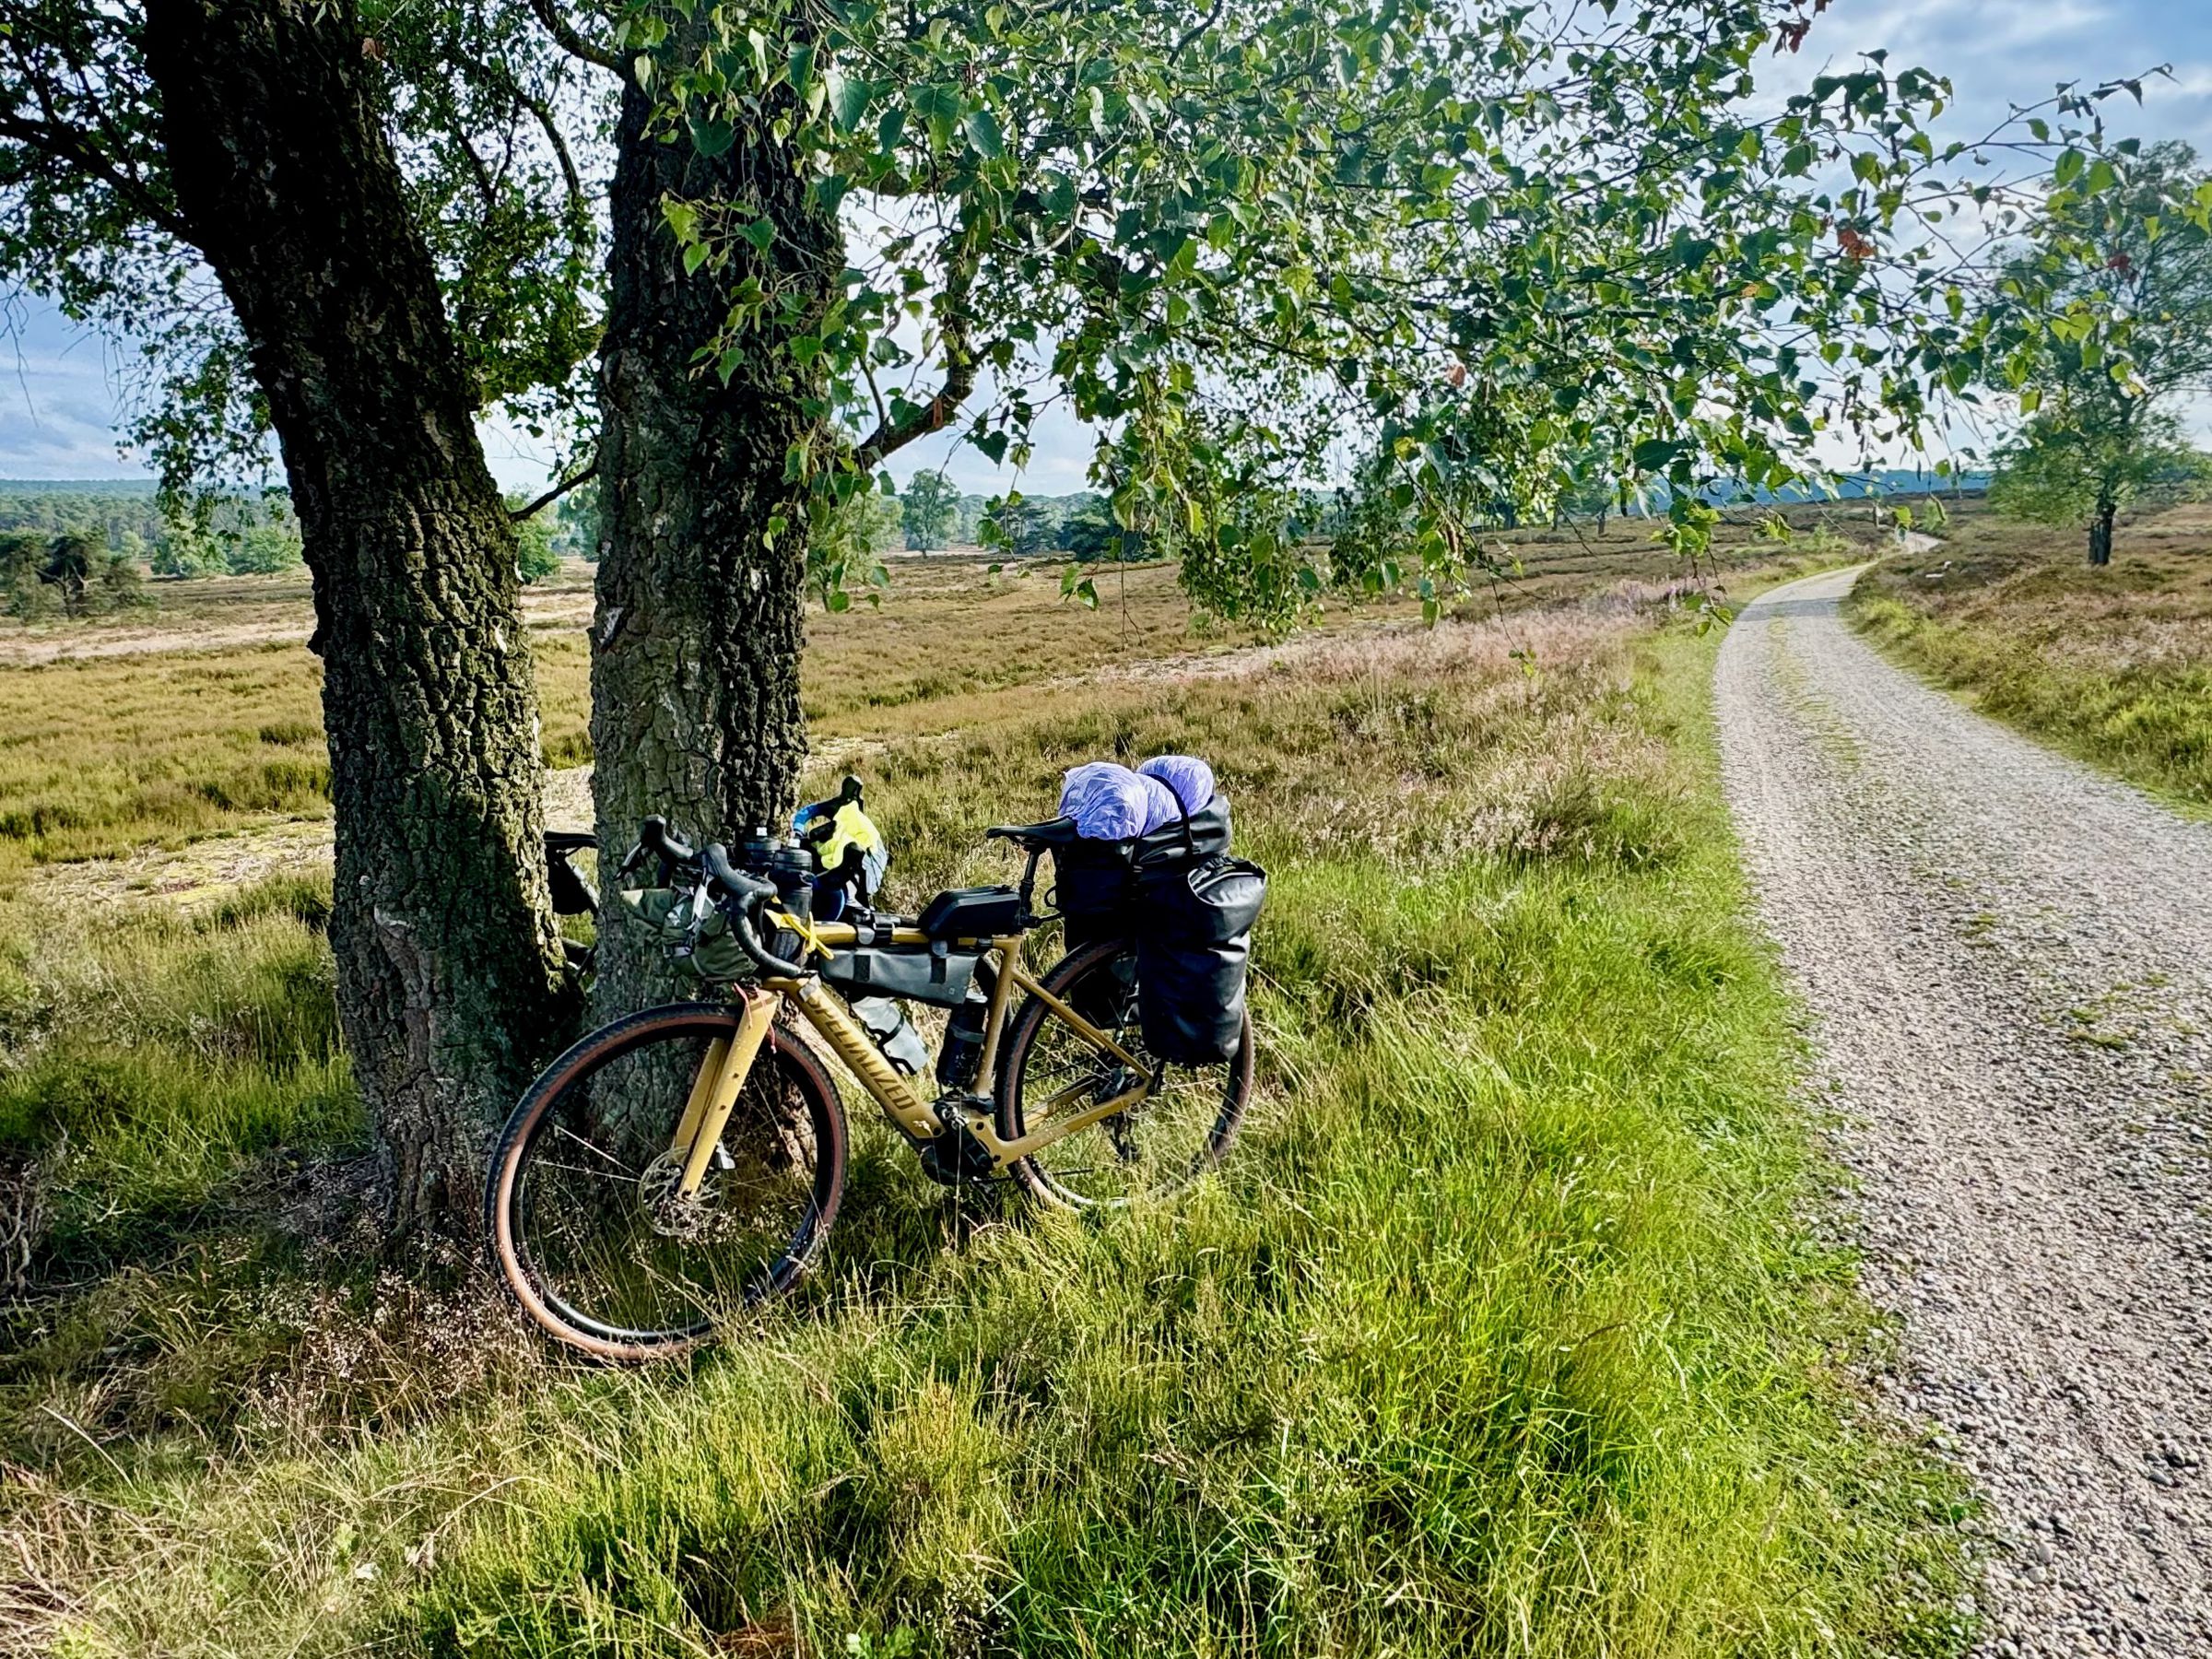 A bike loaded with bikepacking bags and gear leans against a tree in a wide-open Dutch landscape as a gravel road winds into the distance.